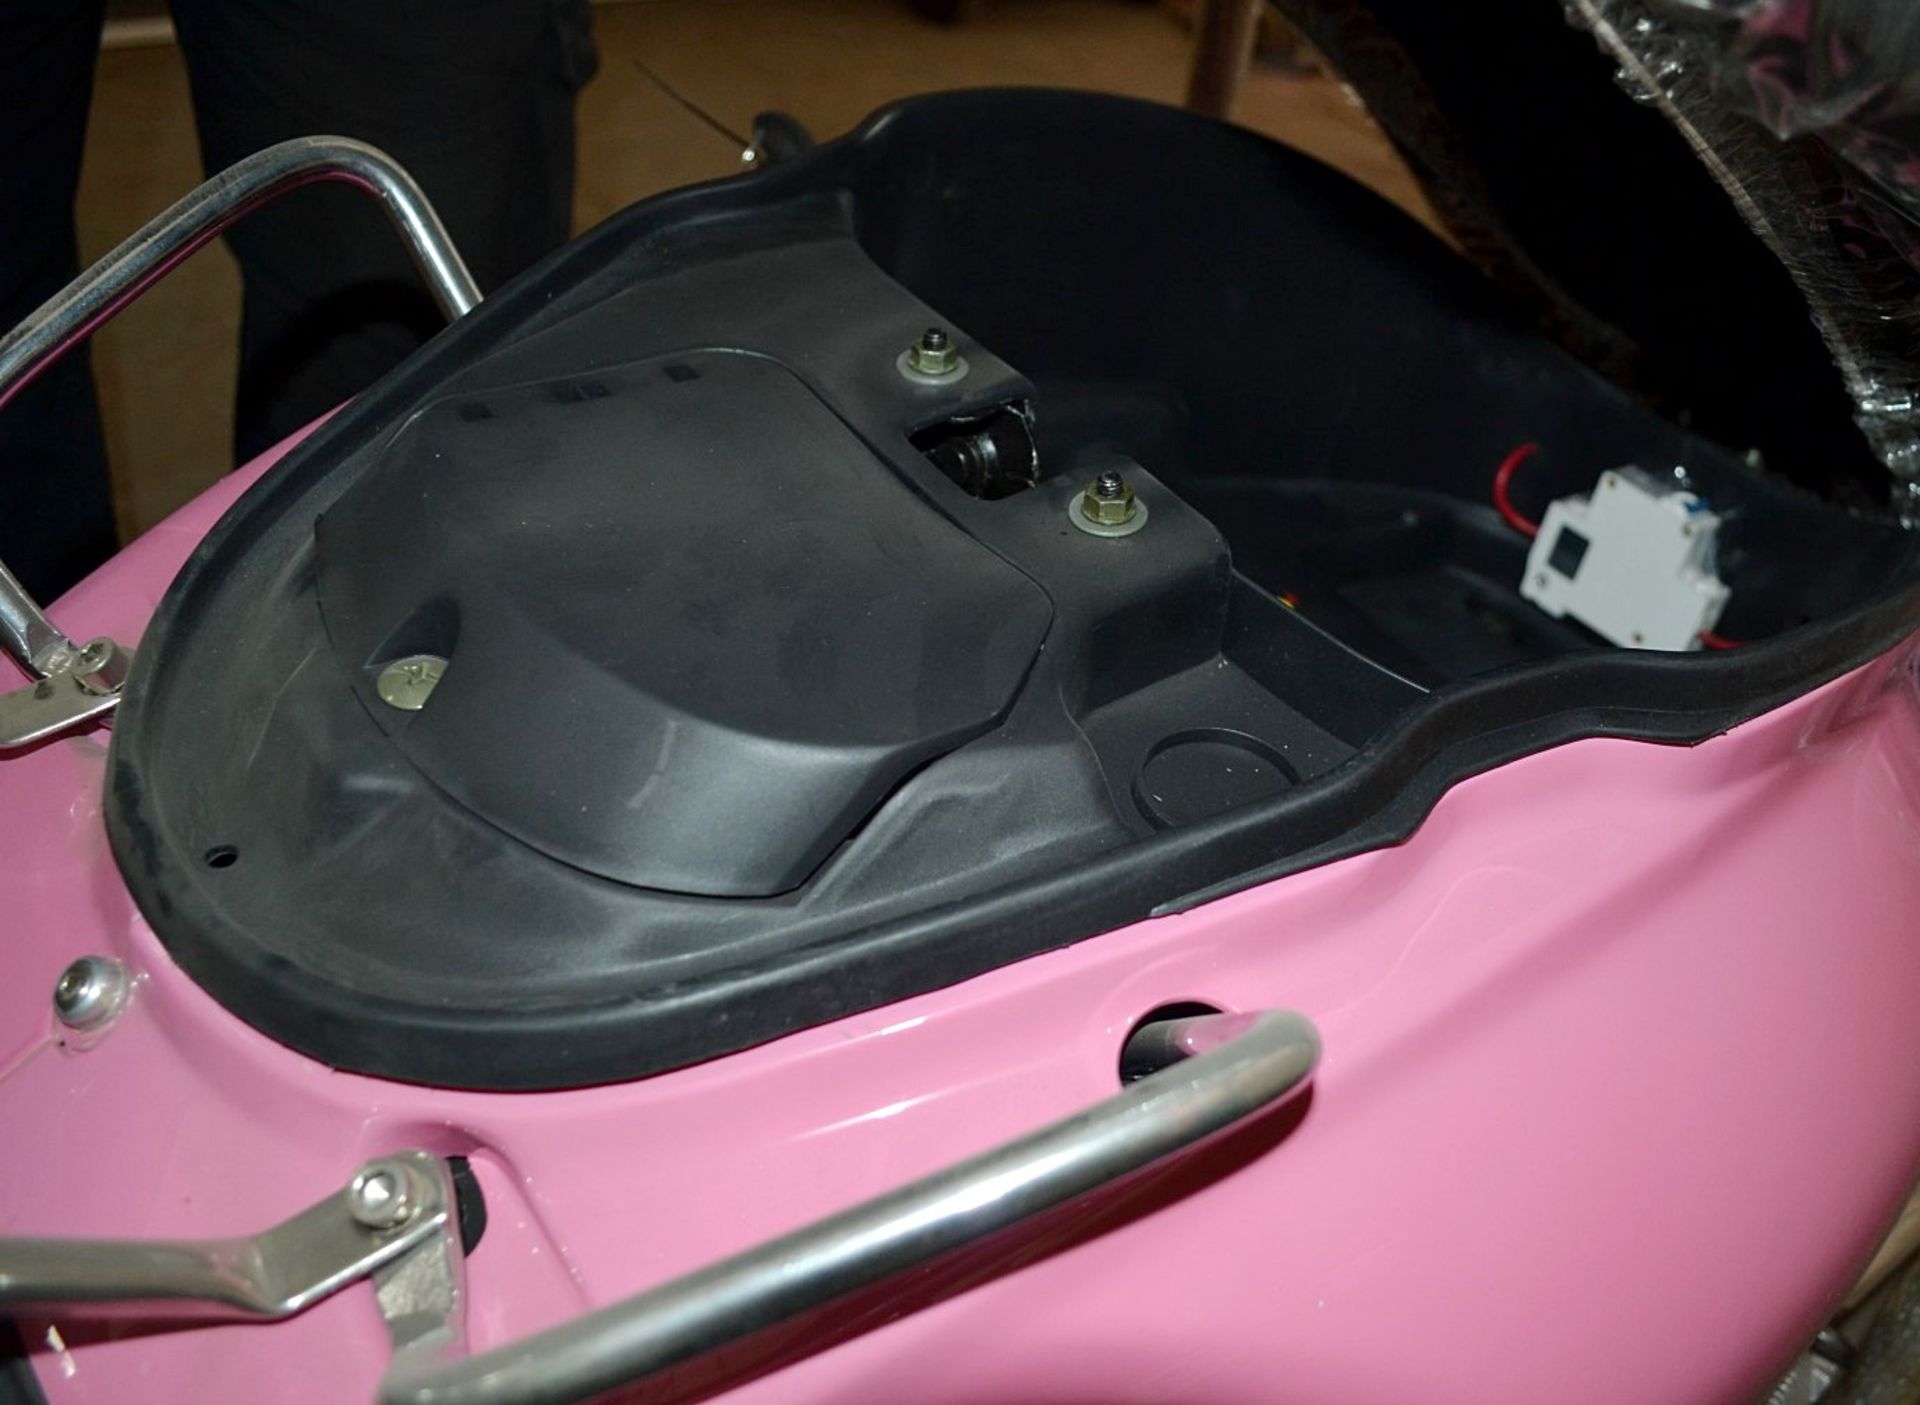 1 x MTL 1500 TDR Electric Scooter In PINK - New/Unused Stock - CL011 - Location: Altrincham WA14 - Image 2 of 15